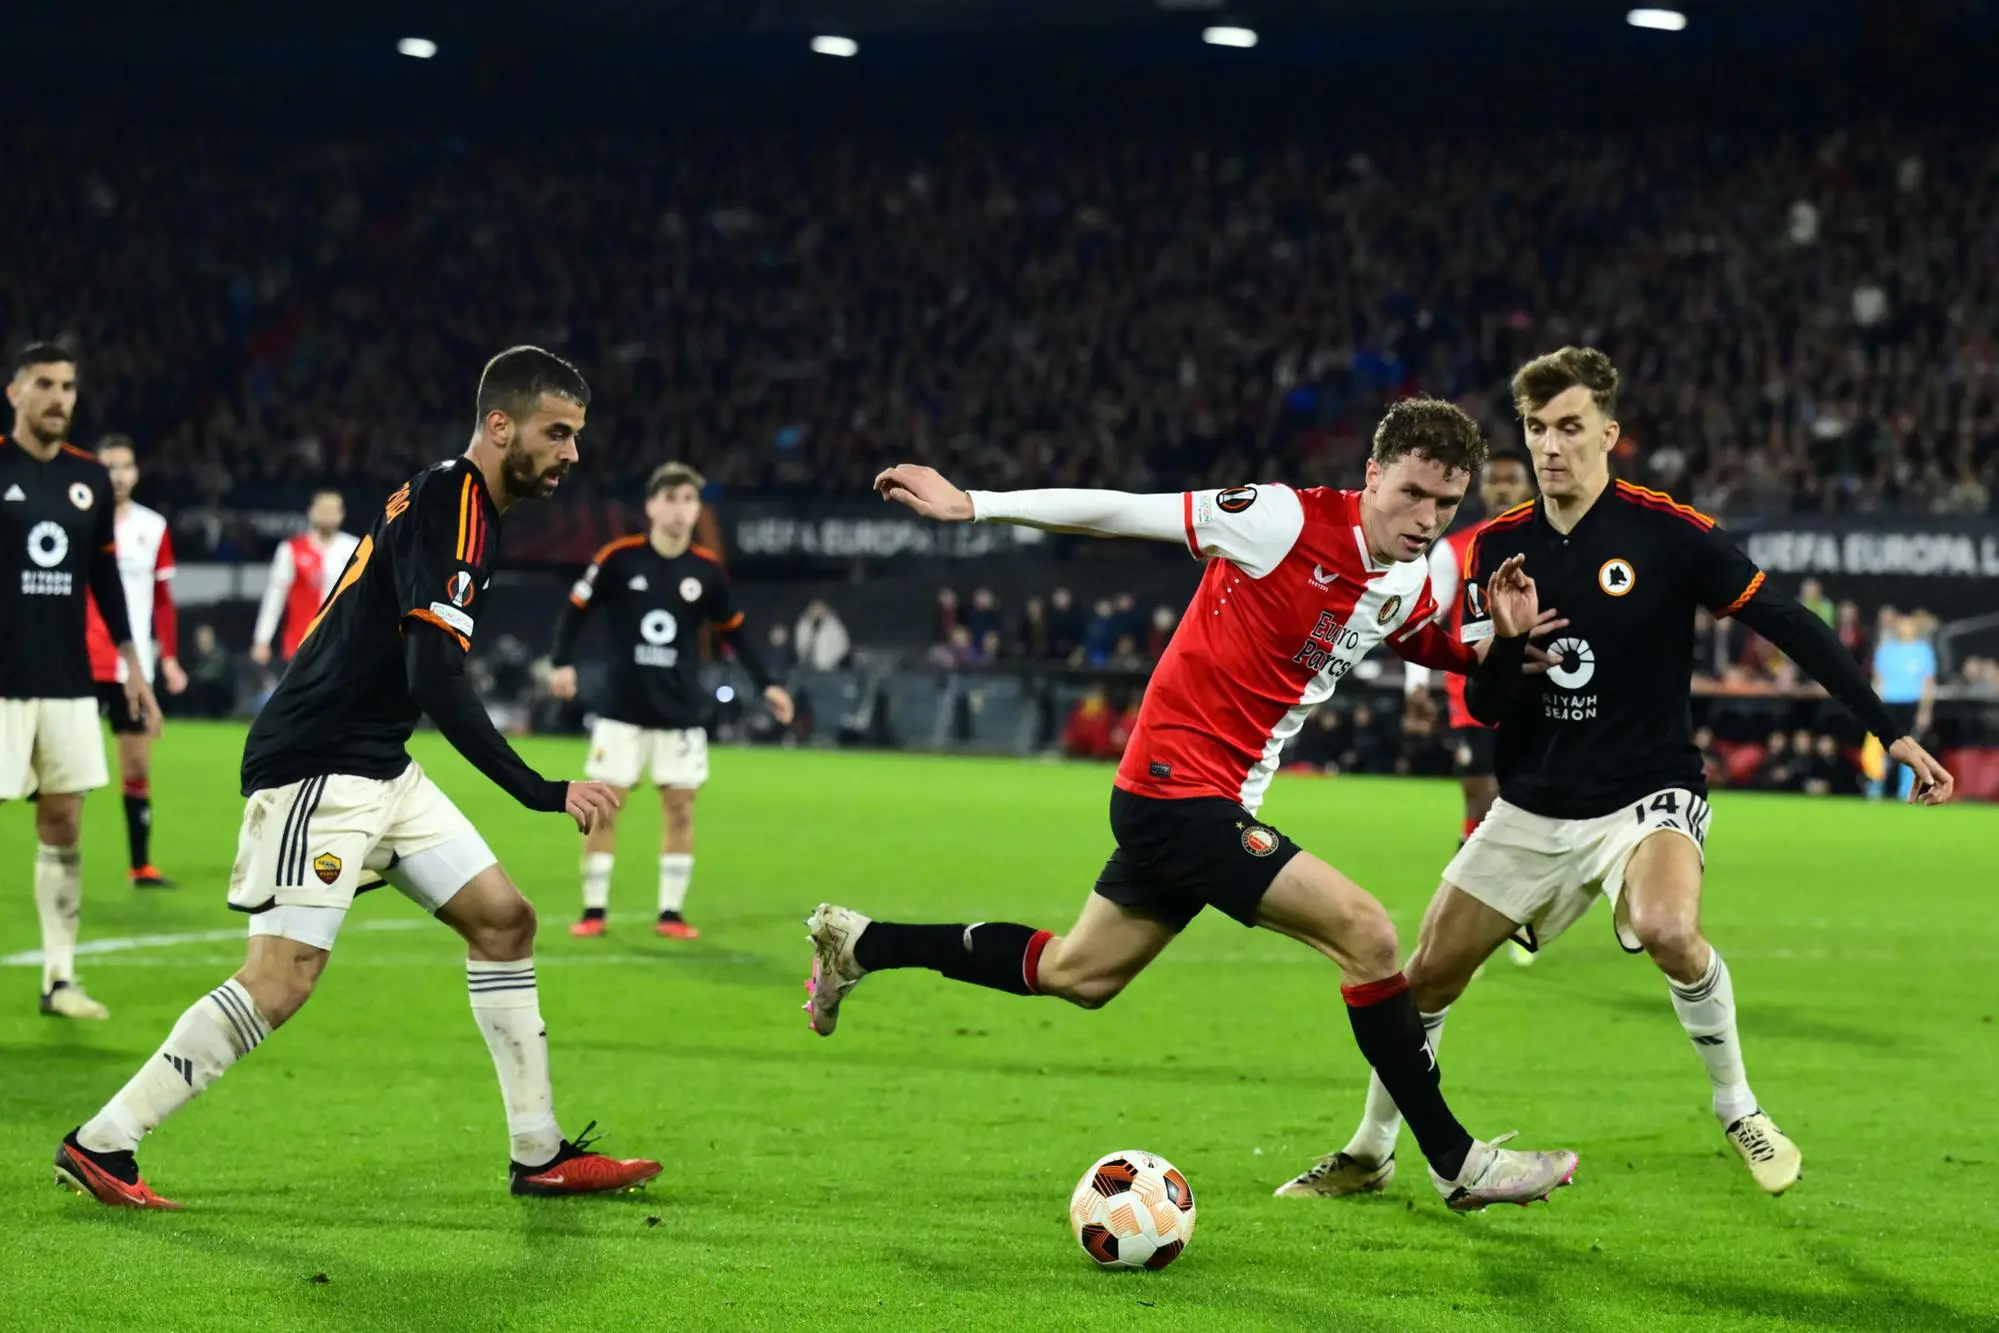 epa11156120 Lorenzo Pellegrini (L) and Diego Llorente (R) of AS Roma in action against Mats Wieffer (C) of Feyenoord during the UEFA Europa League first leg play-off soccer match between Feyenoord Rotterdam and AS Roma, in Rotterdam, the Netherlands, 15 February 2024. EPA/OLAF KRAAK